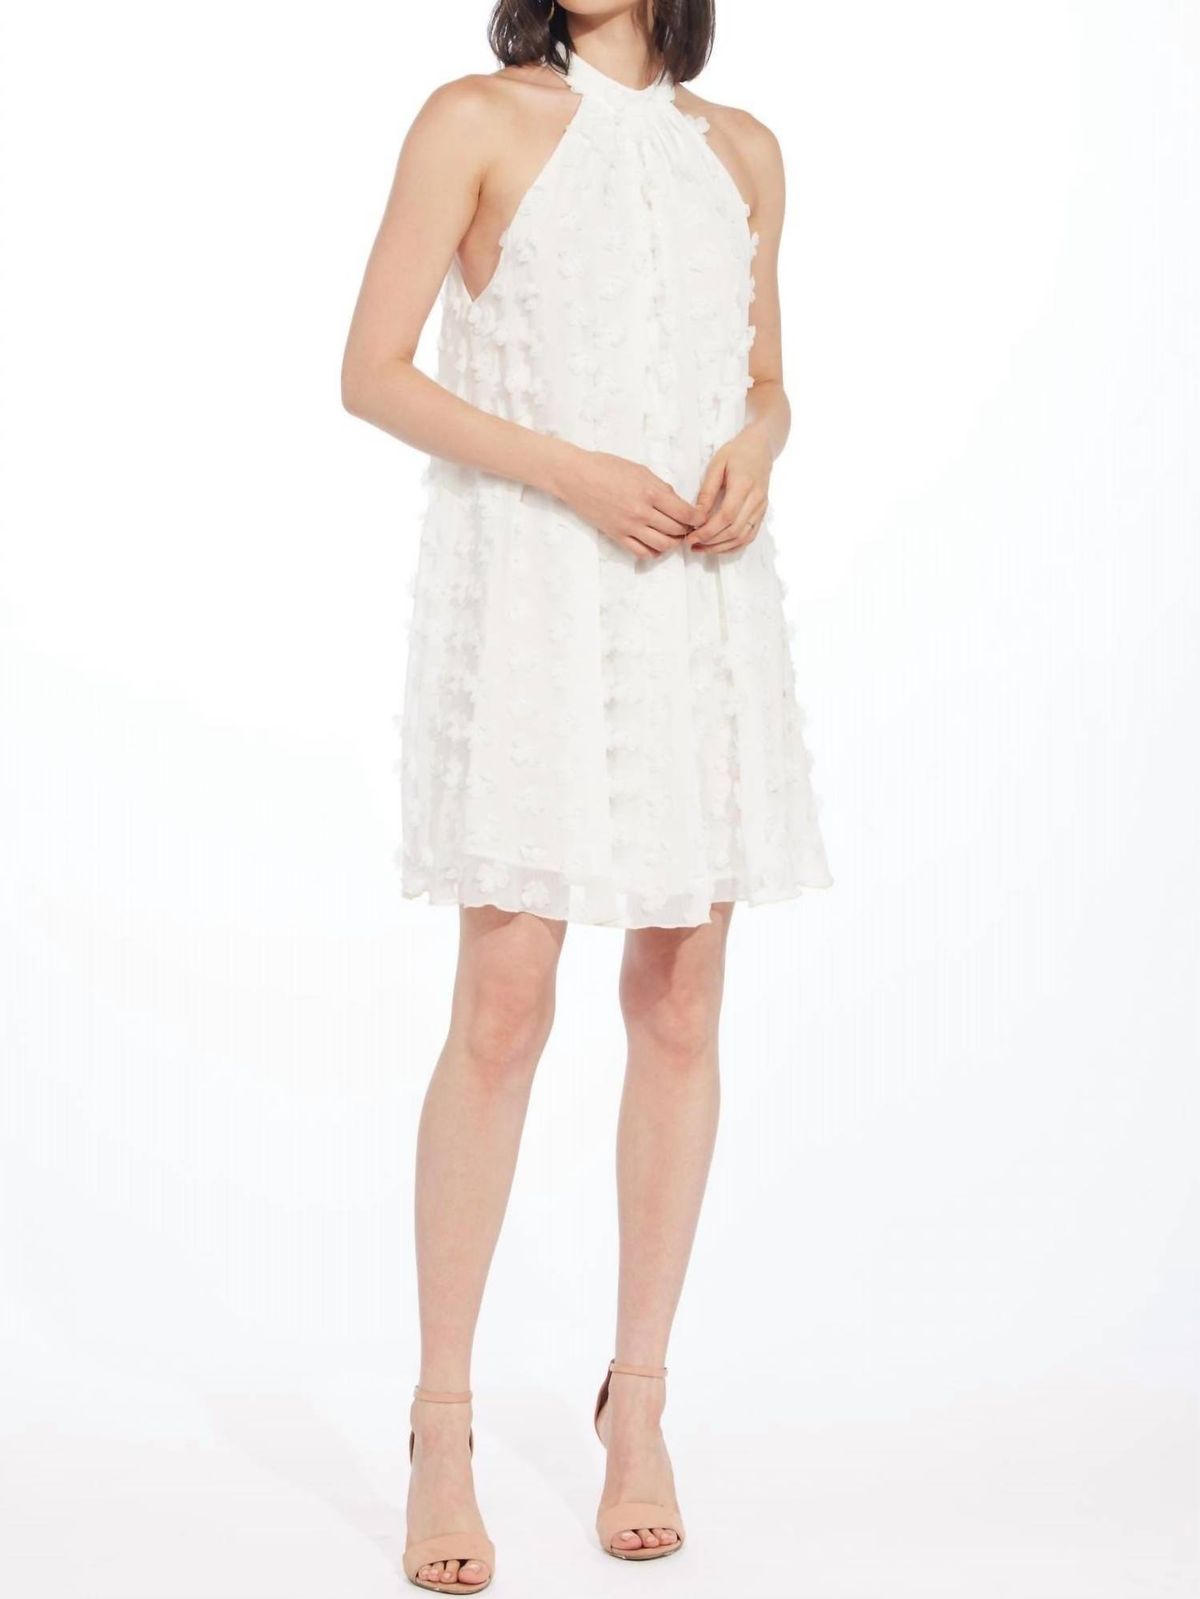 Style 1-2776996364-2168 EVA FRANCO Size 8 Halter White Cocktail Dress on Queenly